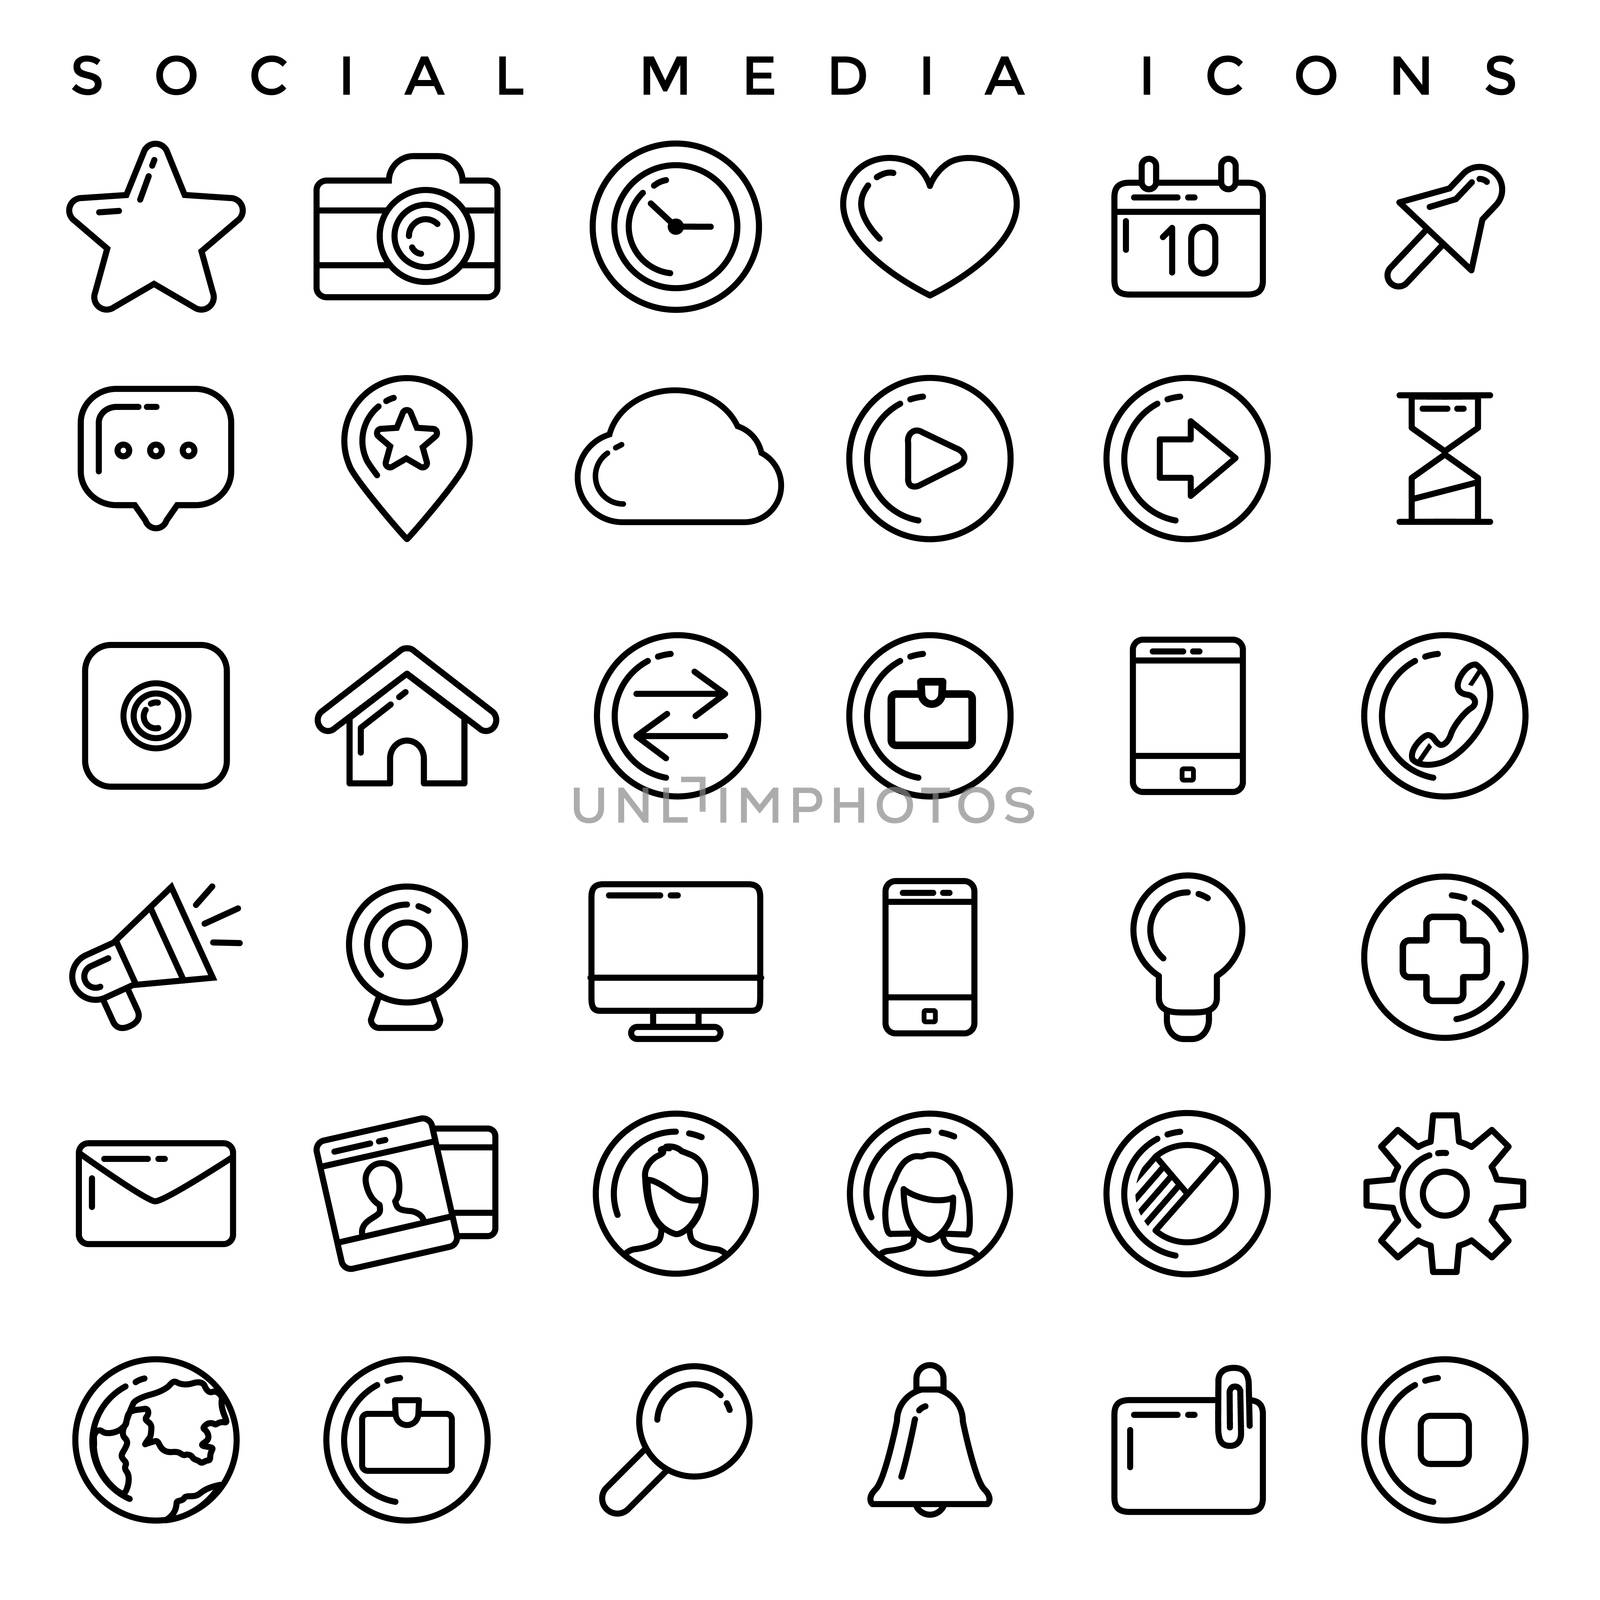 Flat linear icons of social media, social networking, mobile app, sharing, communication, and social commerce.